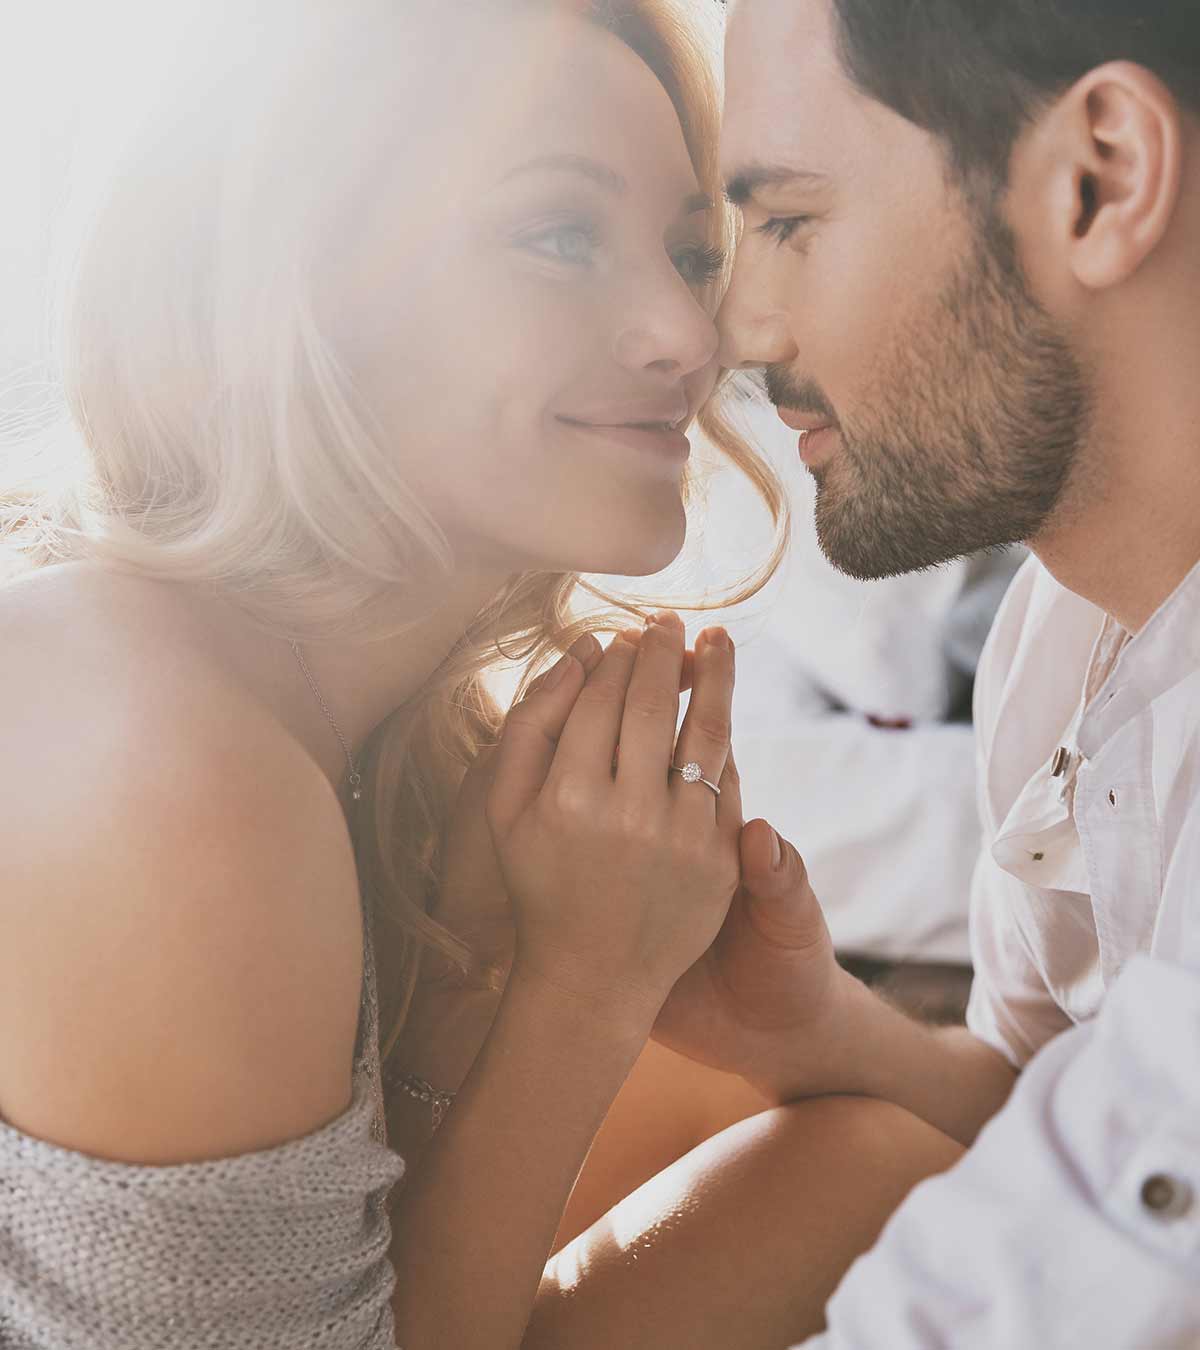 29 Ways To Be Romantic With Your Husband